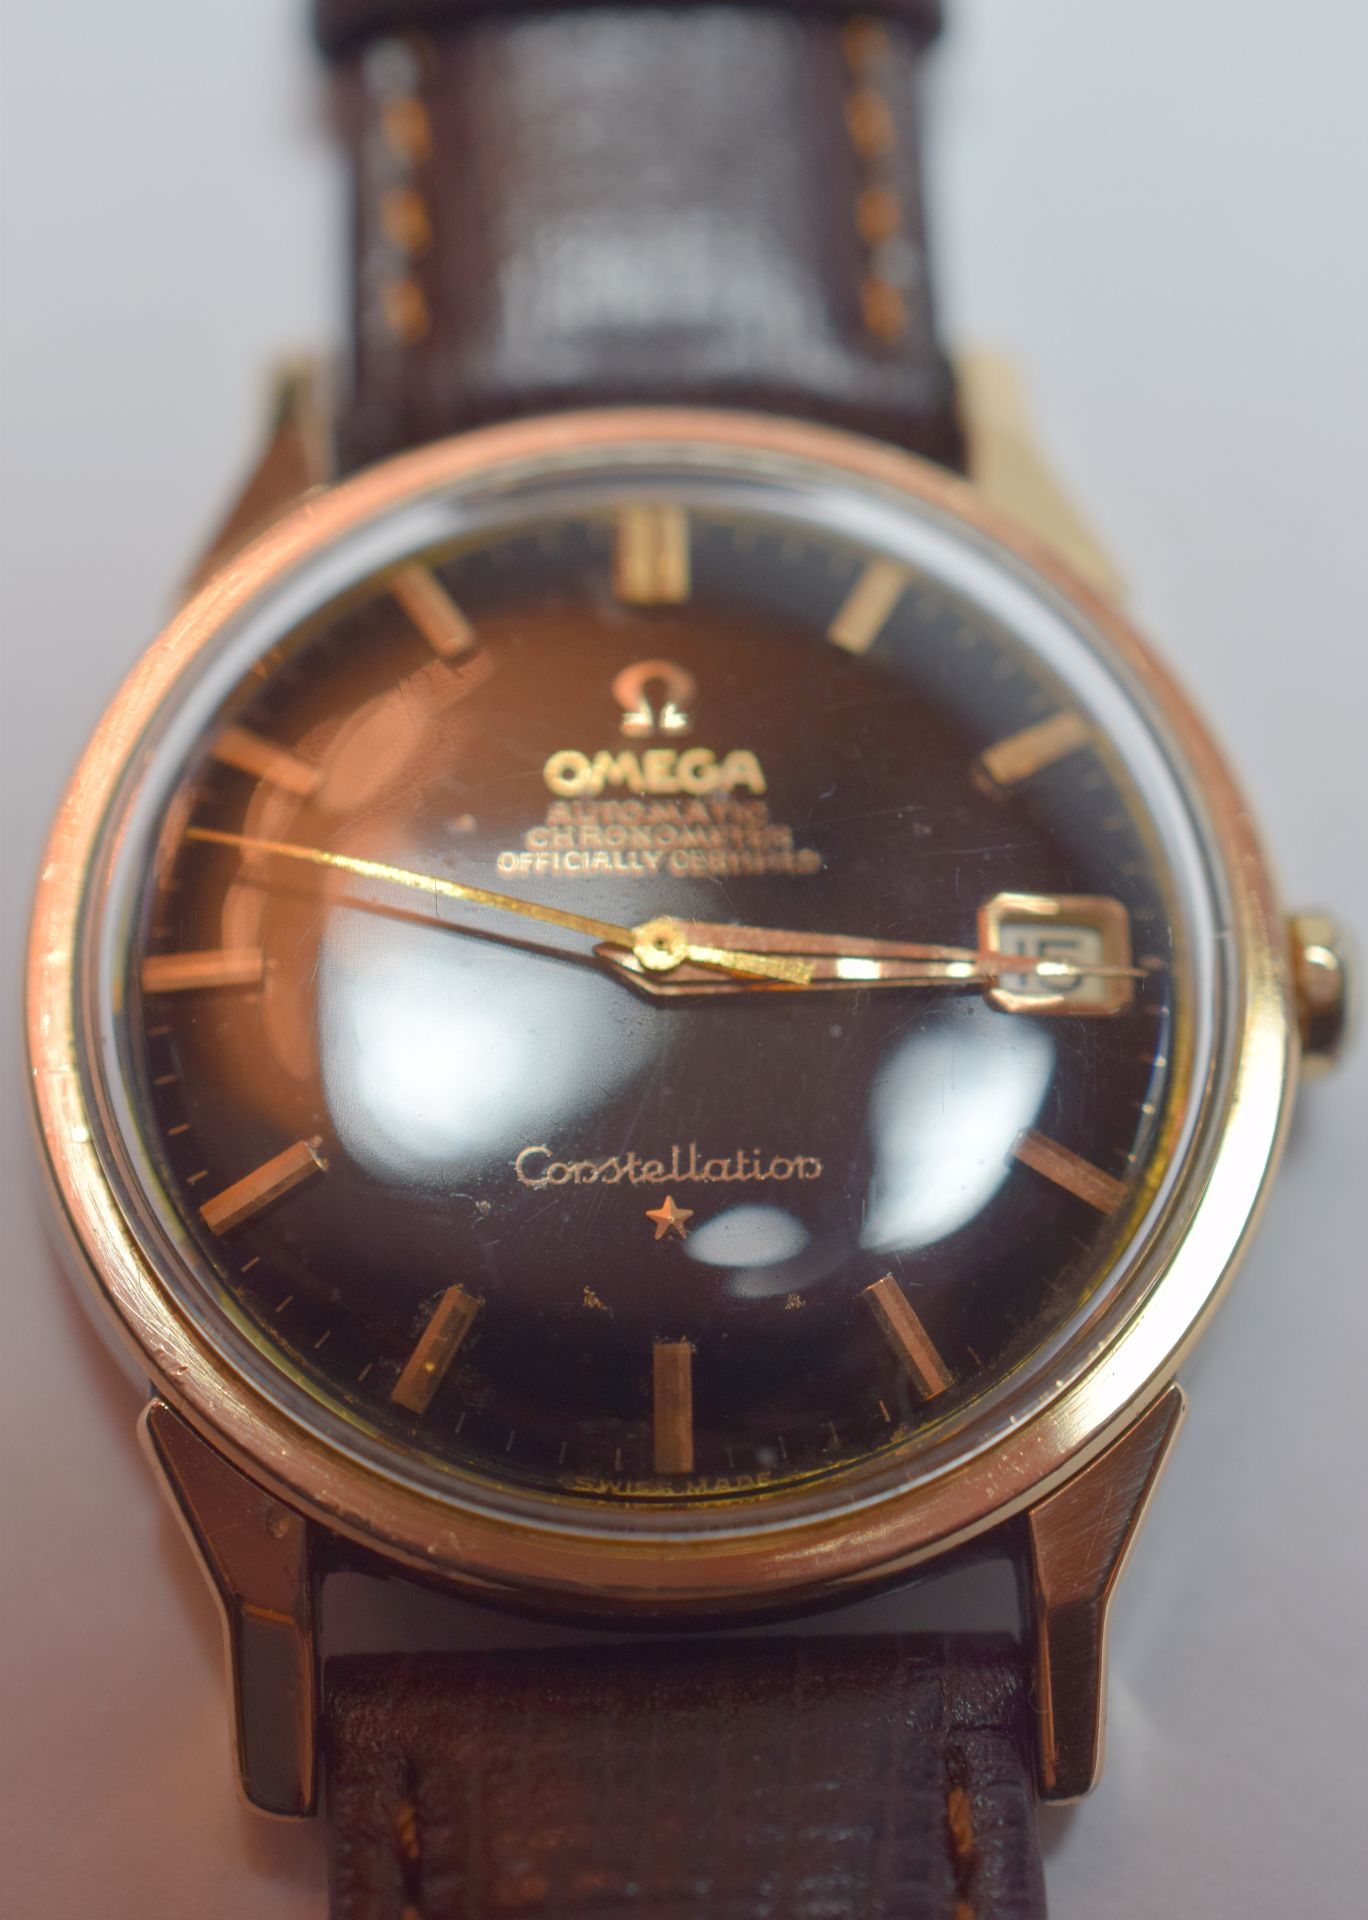 Omega Constellation Black Dial Gold Capped On Chrome c1960/70s ***Reserve Reduced*** - Image 7 of 8